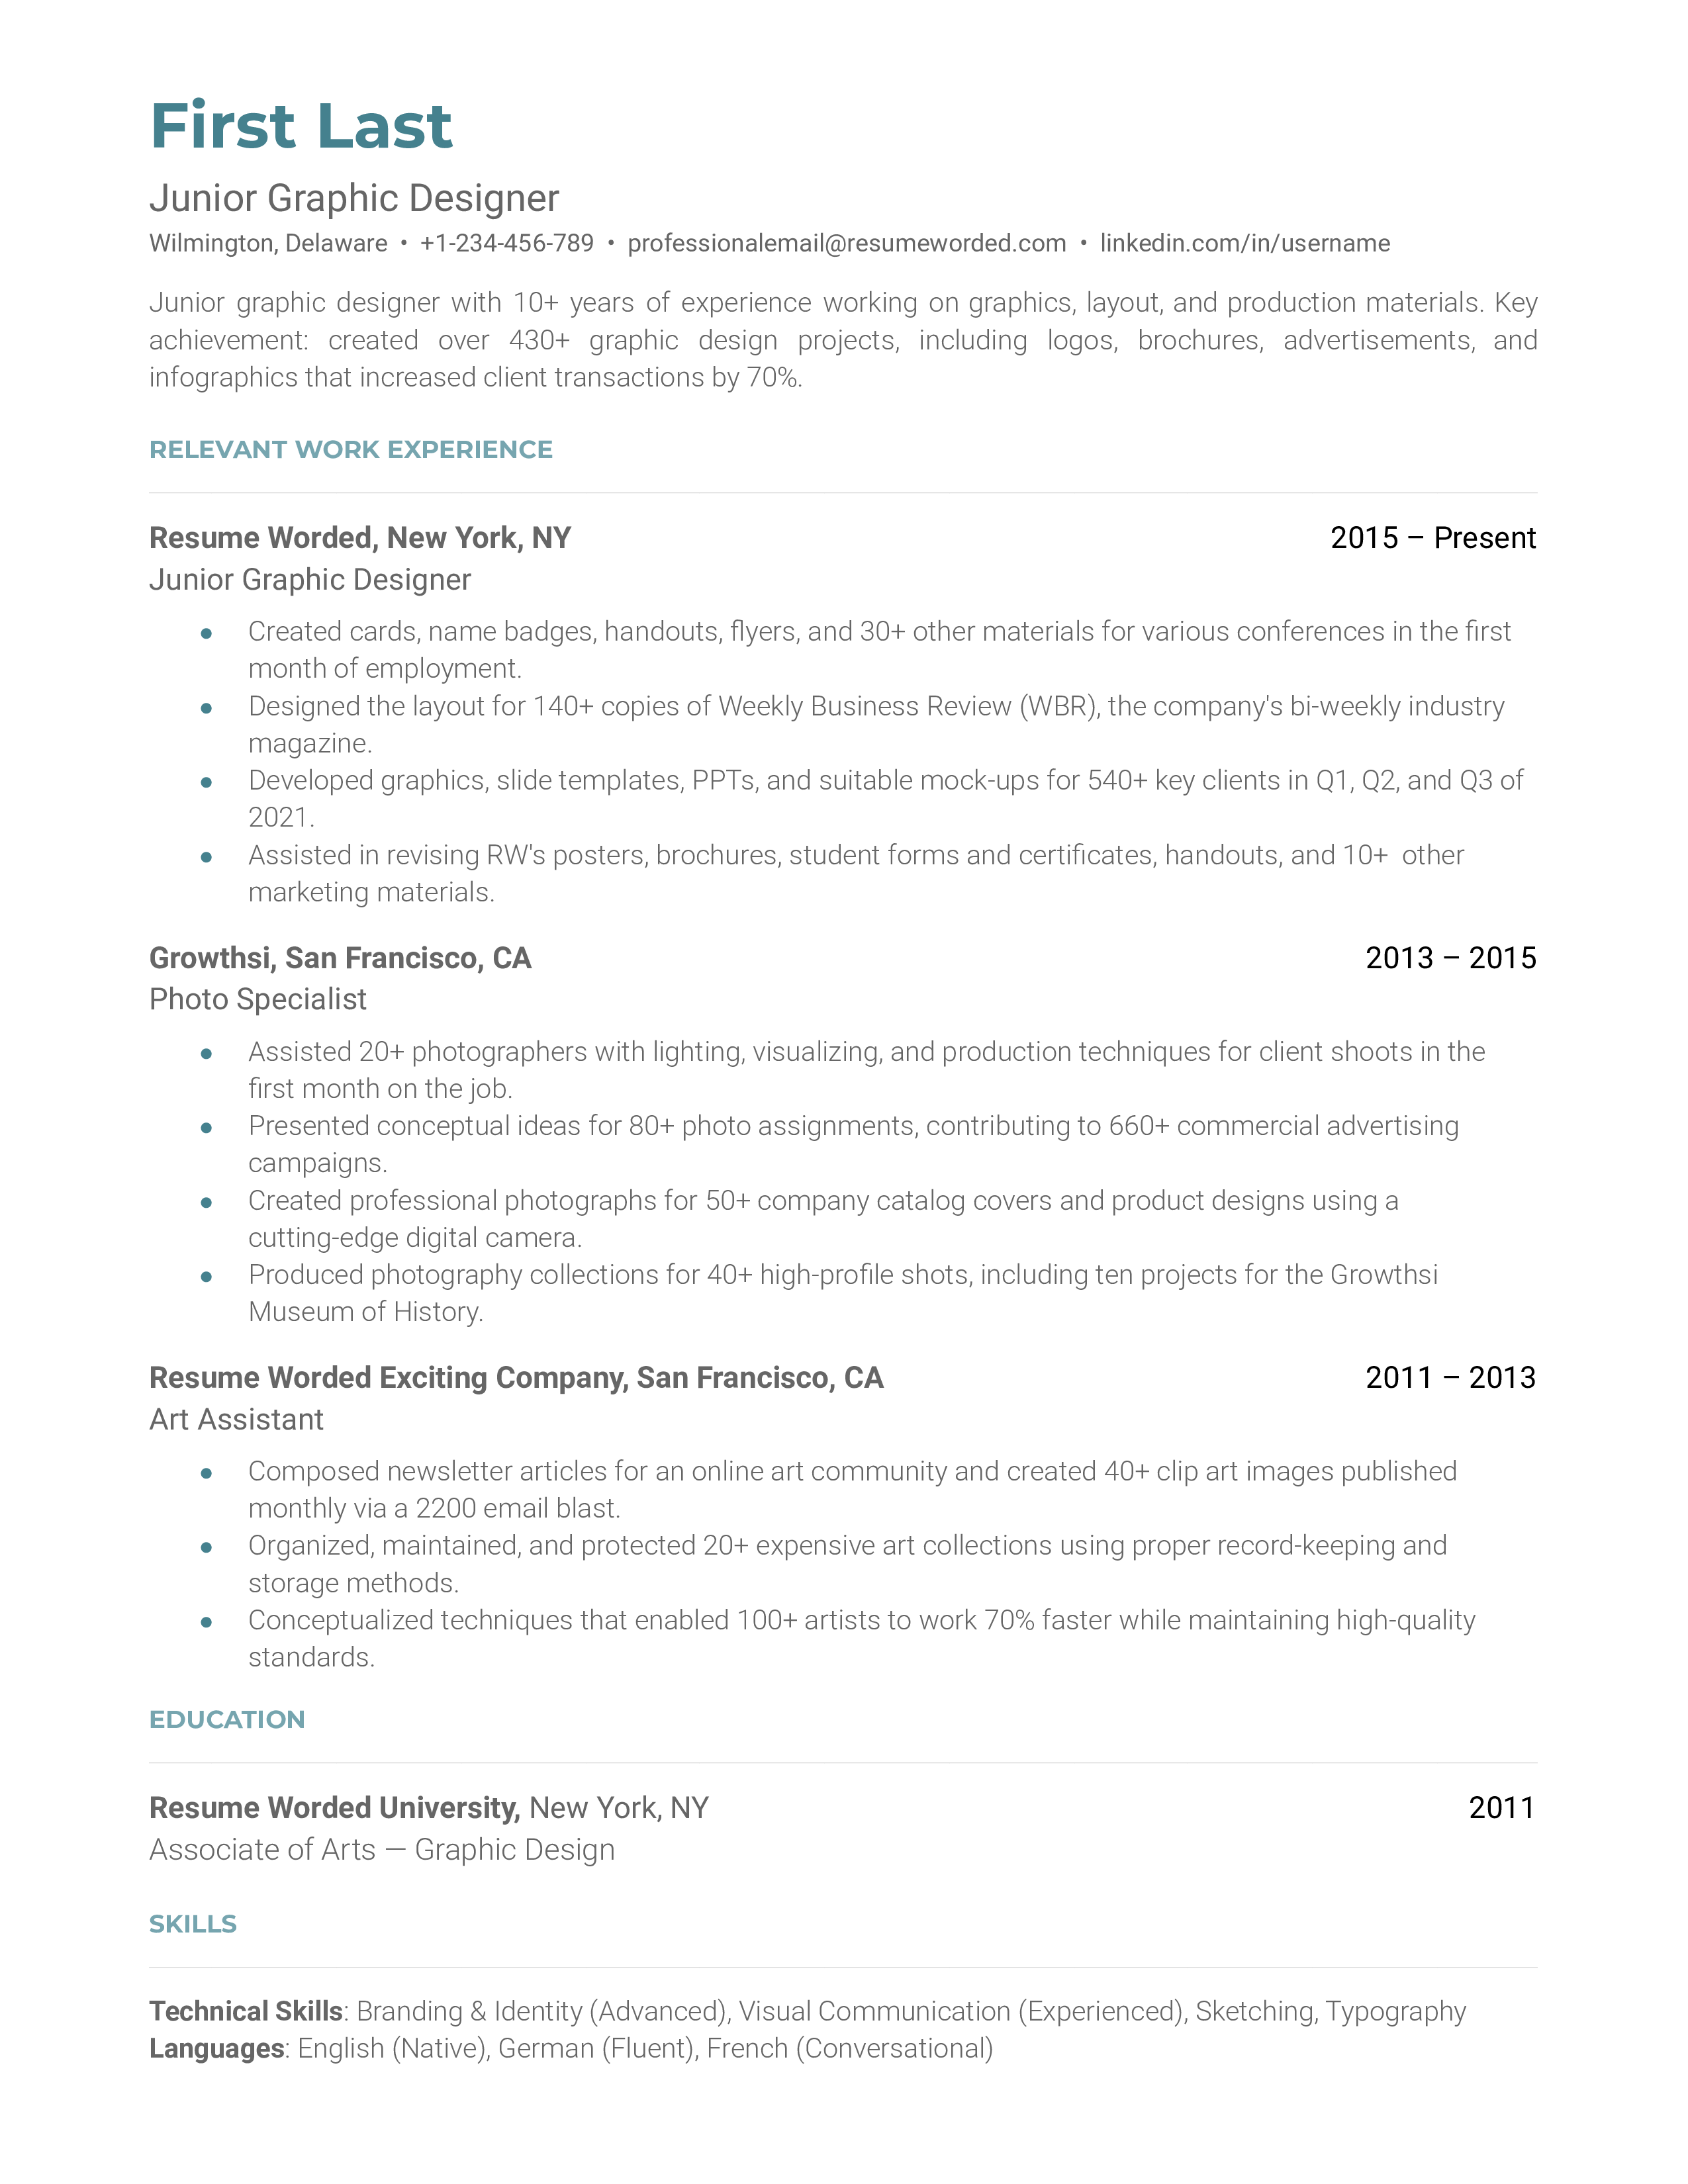 Junior Graphic Designer's CV featuring a summary of skills, education details, work experience, and a link to an online portfolio.